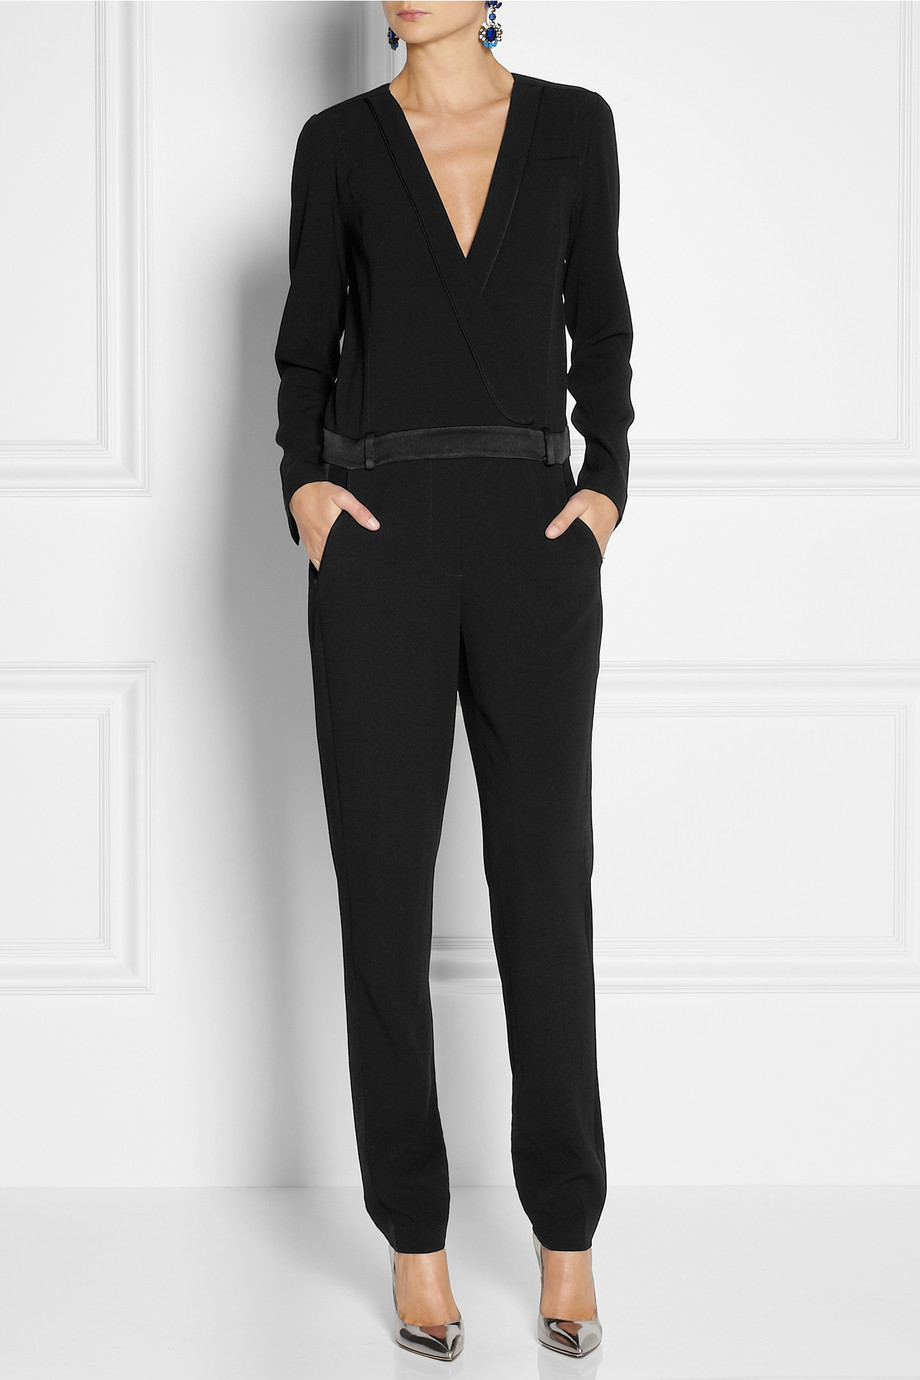 Lyst - Marc By Marc Jacobs Anya Crepe Jumpsuit in Black